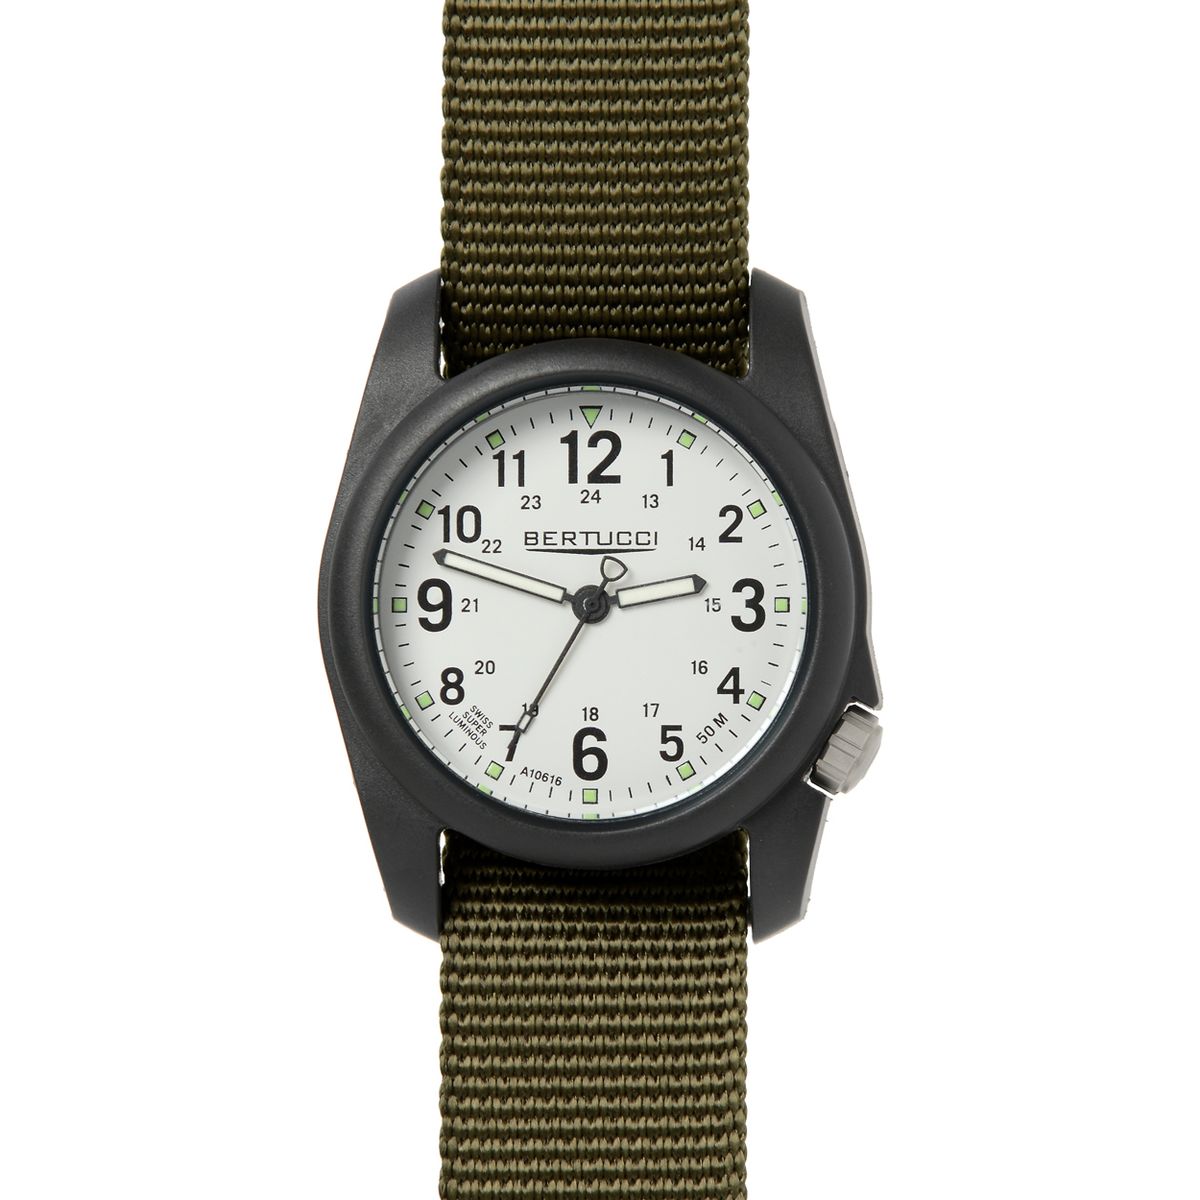 Bertucci Watches DX3 Field Watch Stone Dial\/Defender Olive Band, One Size